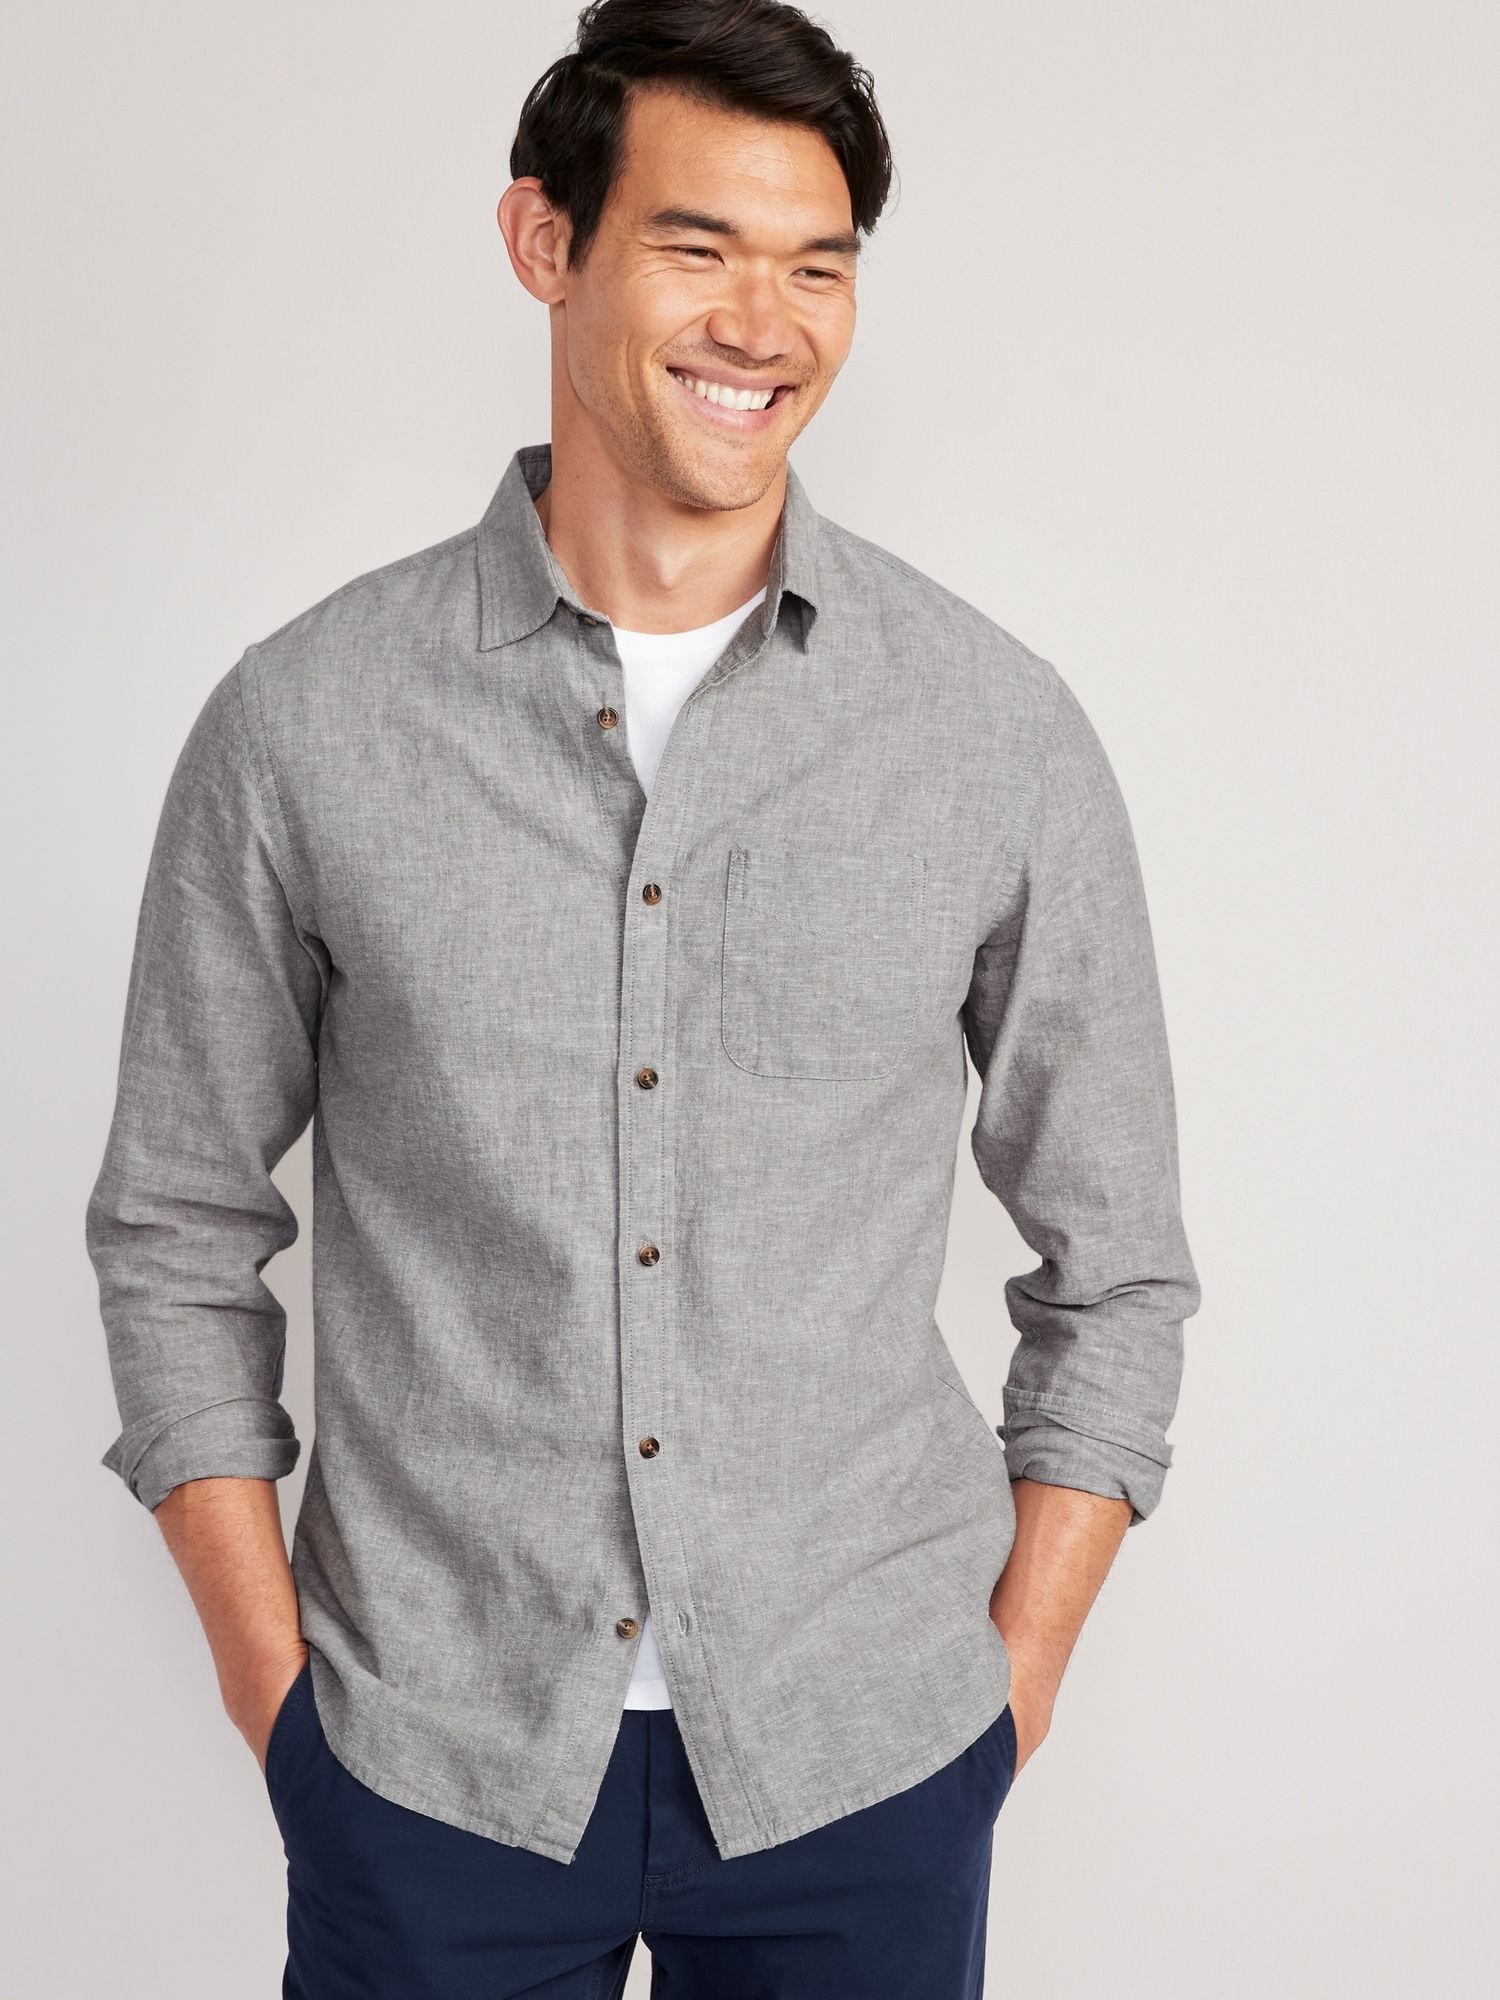 Linen Collared Shirts | Old Navy